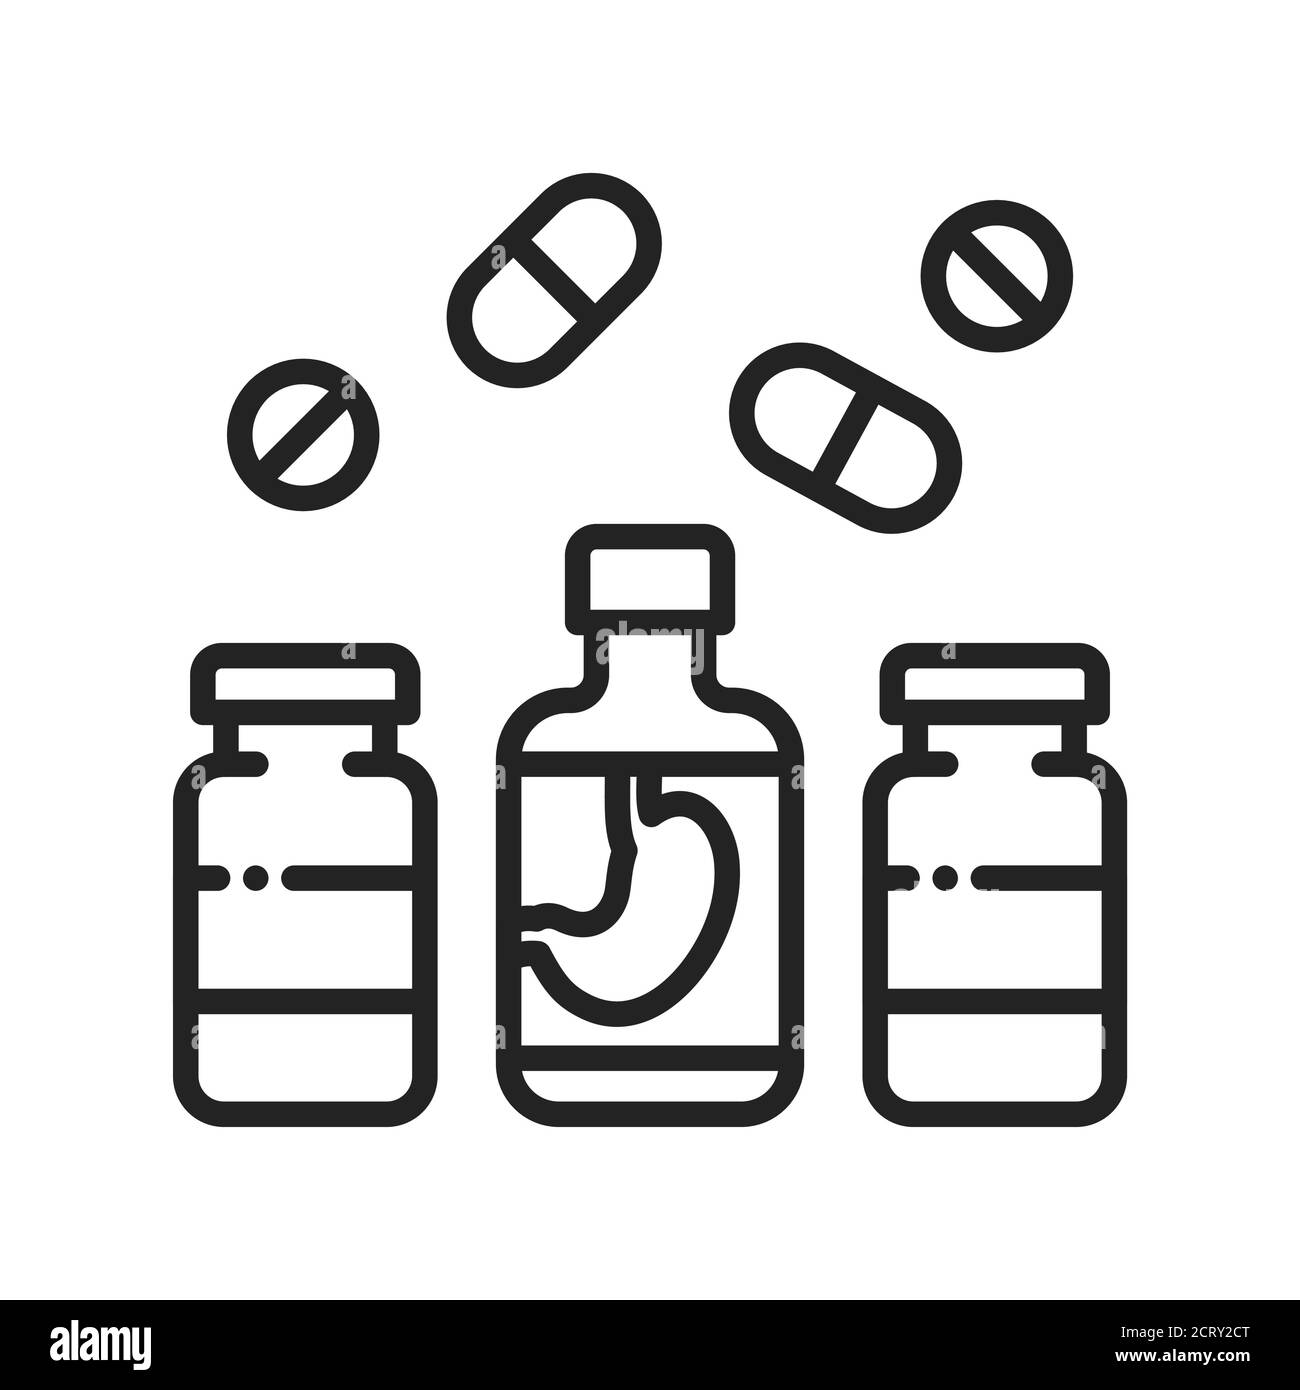 Pharmaceutical product black line icon. Digestive tract diseases. Sign for web page, mobile app, button, logo. Editable stroke Stock Vector